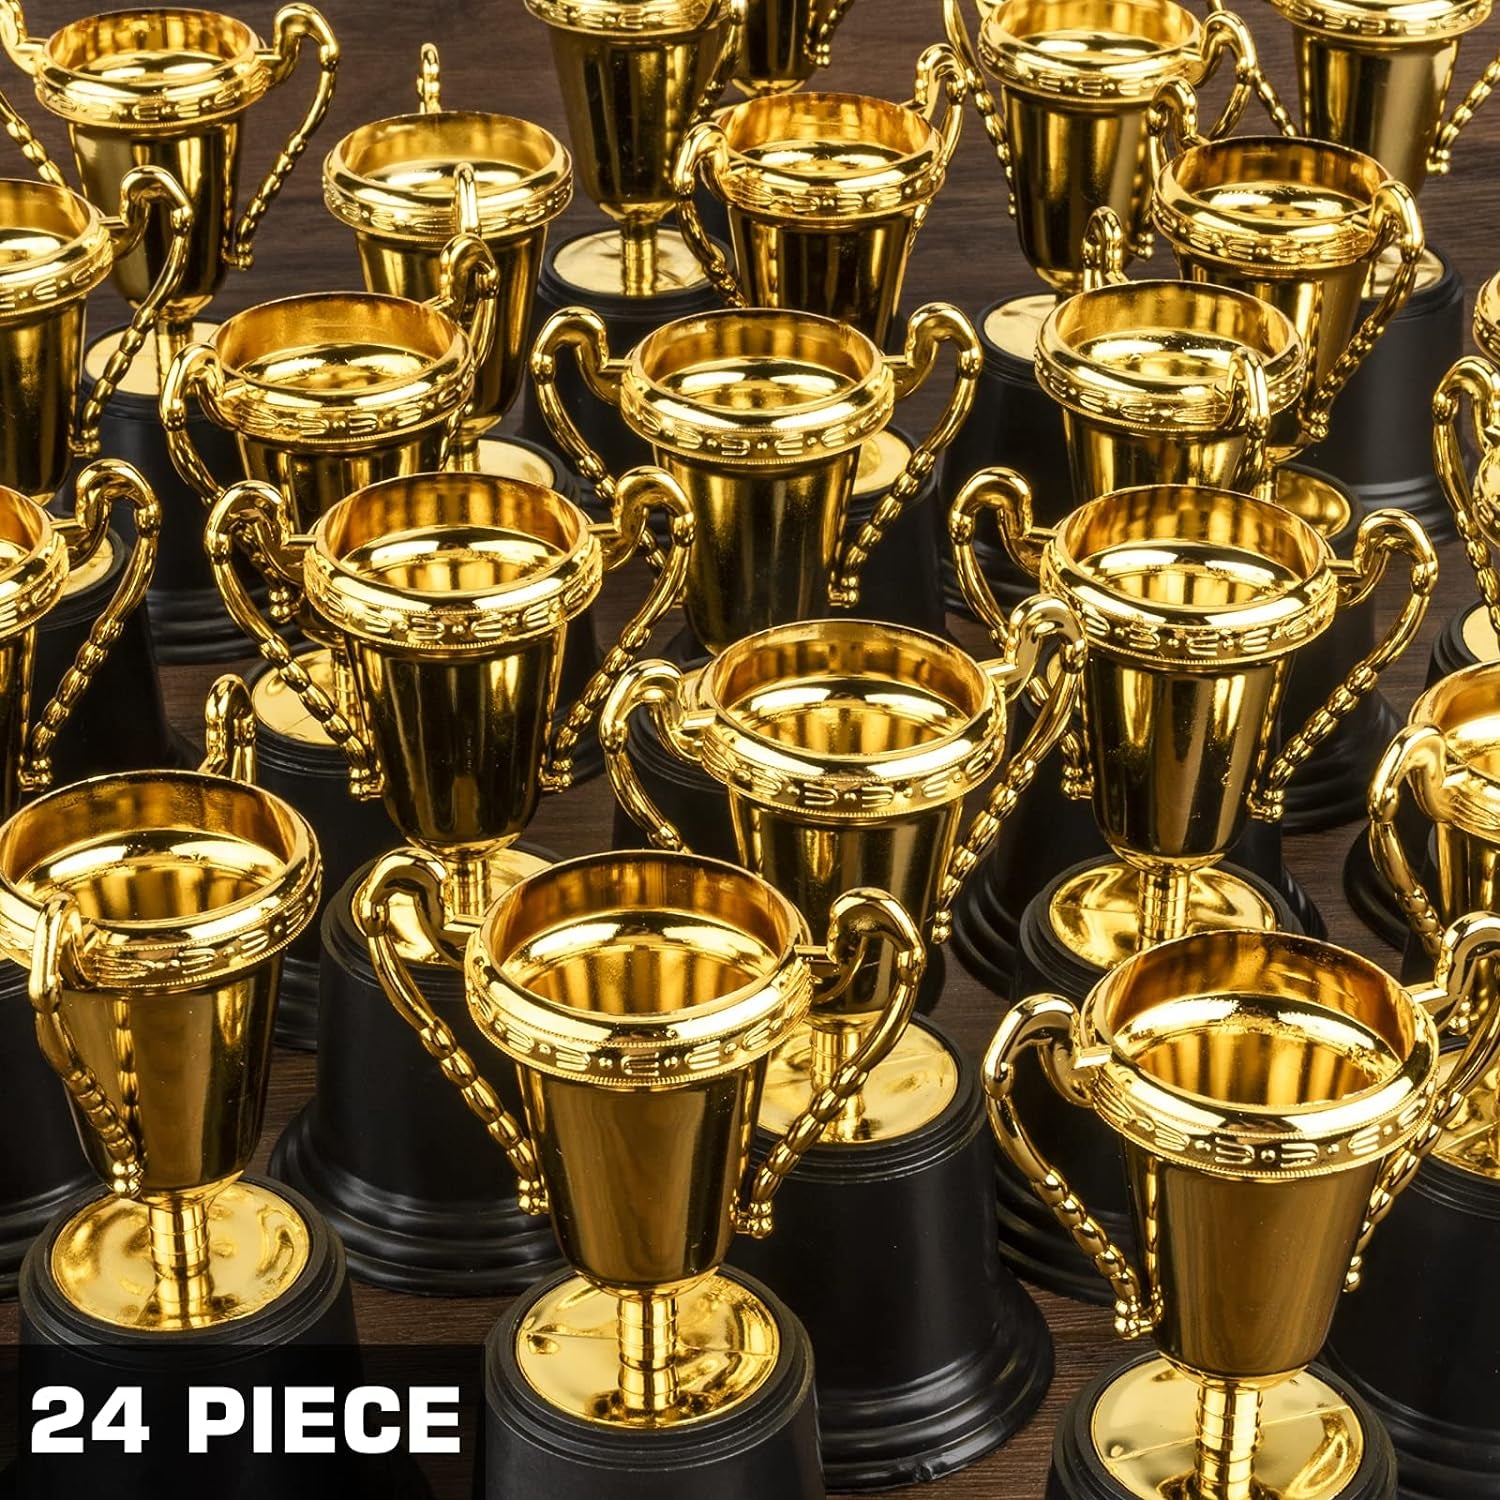 24 Pack Gold Award Trophy, 5 Inch Plastic Golden Mini Trophies Cup for Halloween Party Favors, Kids Classroom School Rewards, Competition or Celebration Awards Props, Sports Tournament Winning Prizes